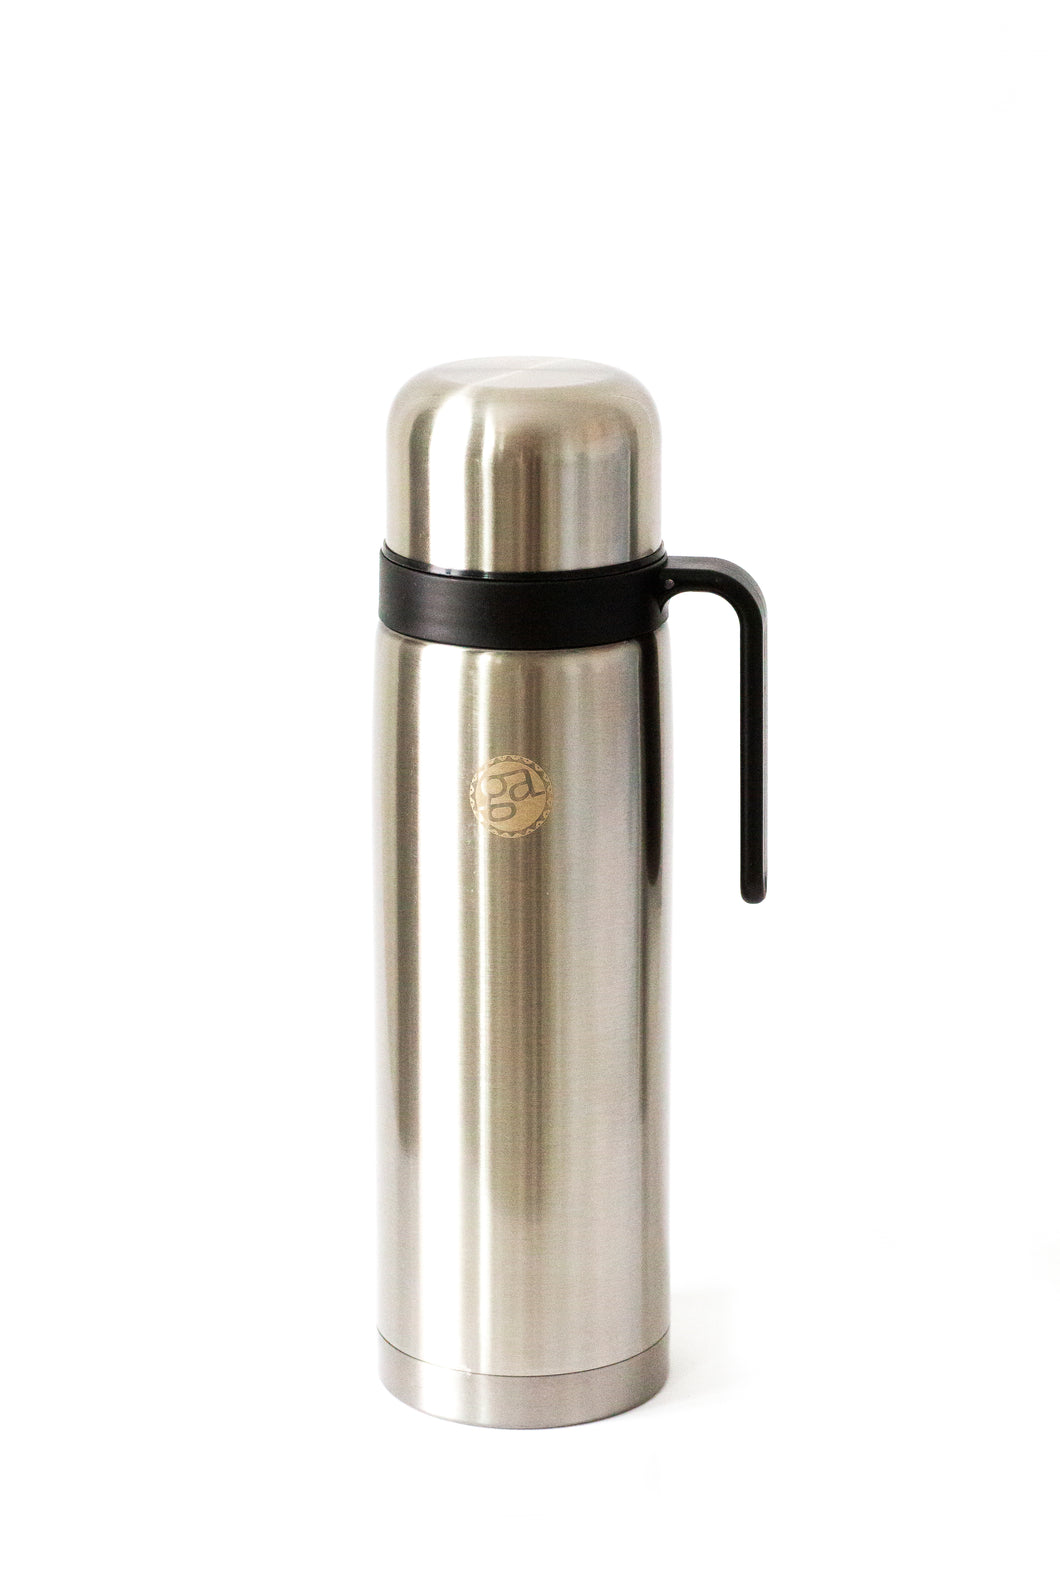 1lt Flask with Matero Spout -Aluminium - Gusto Argentino